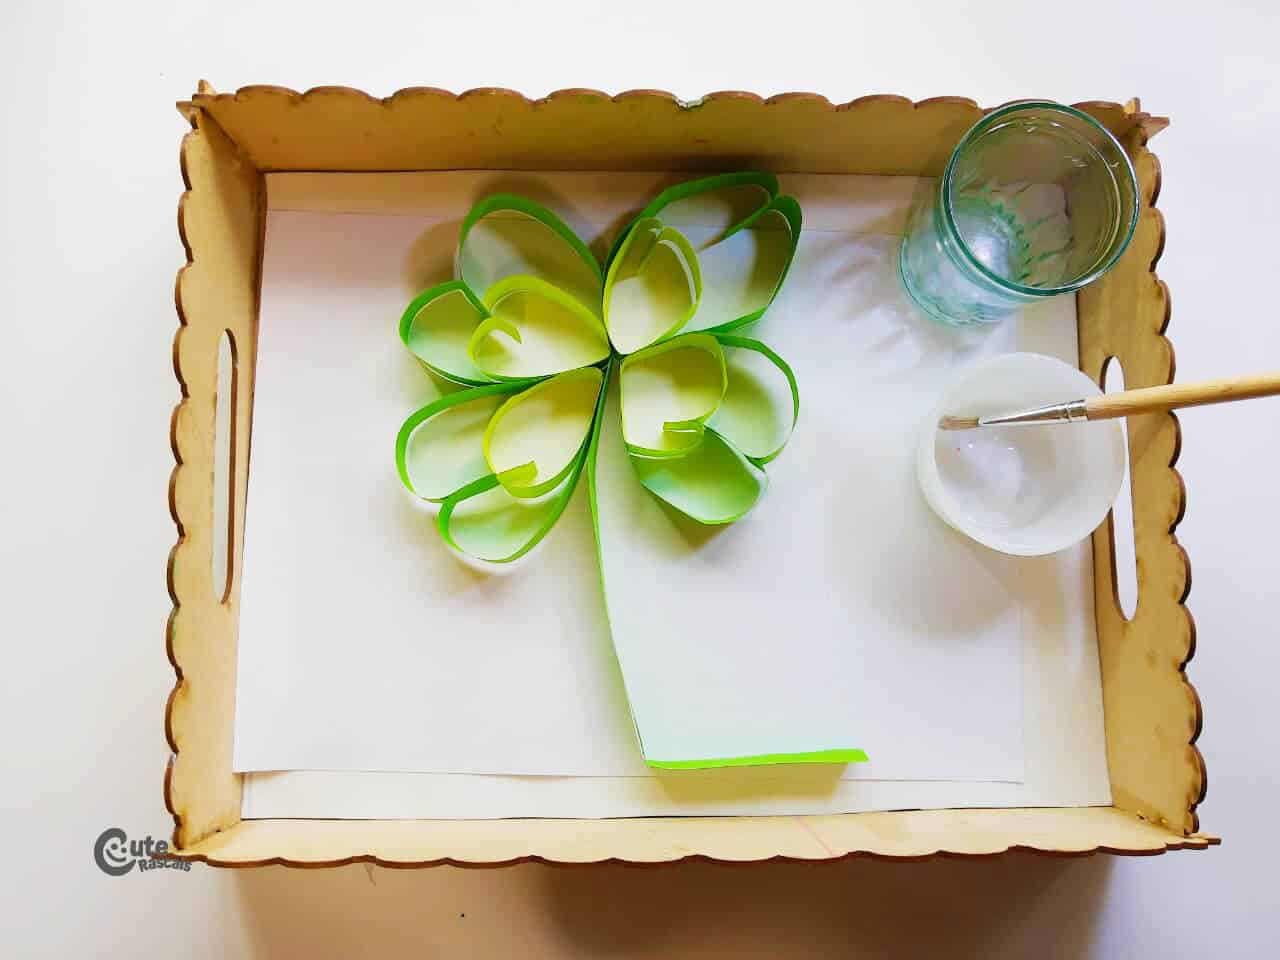 clover craft made with bond paper strips. Craft activity for kids